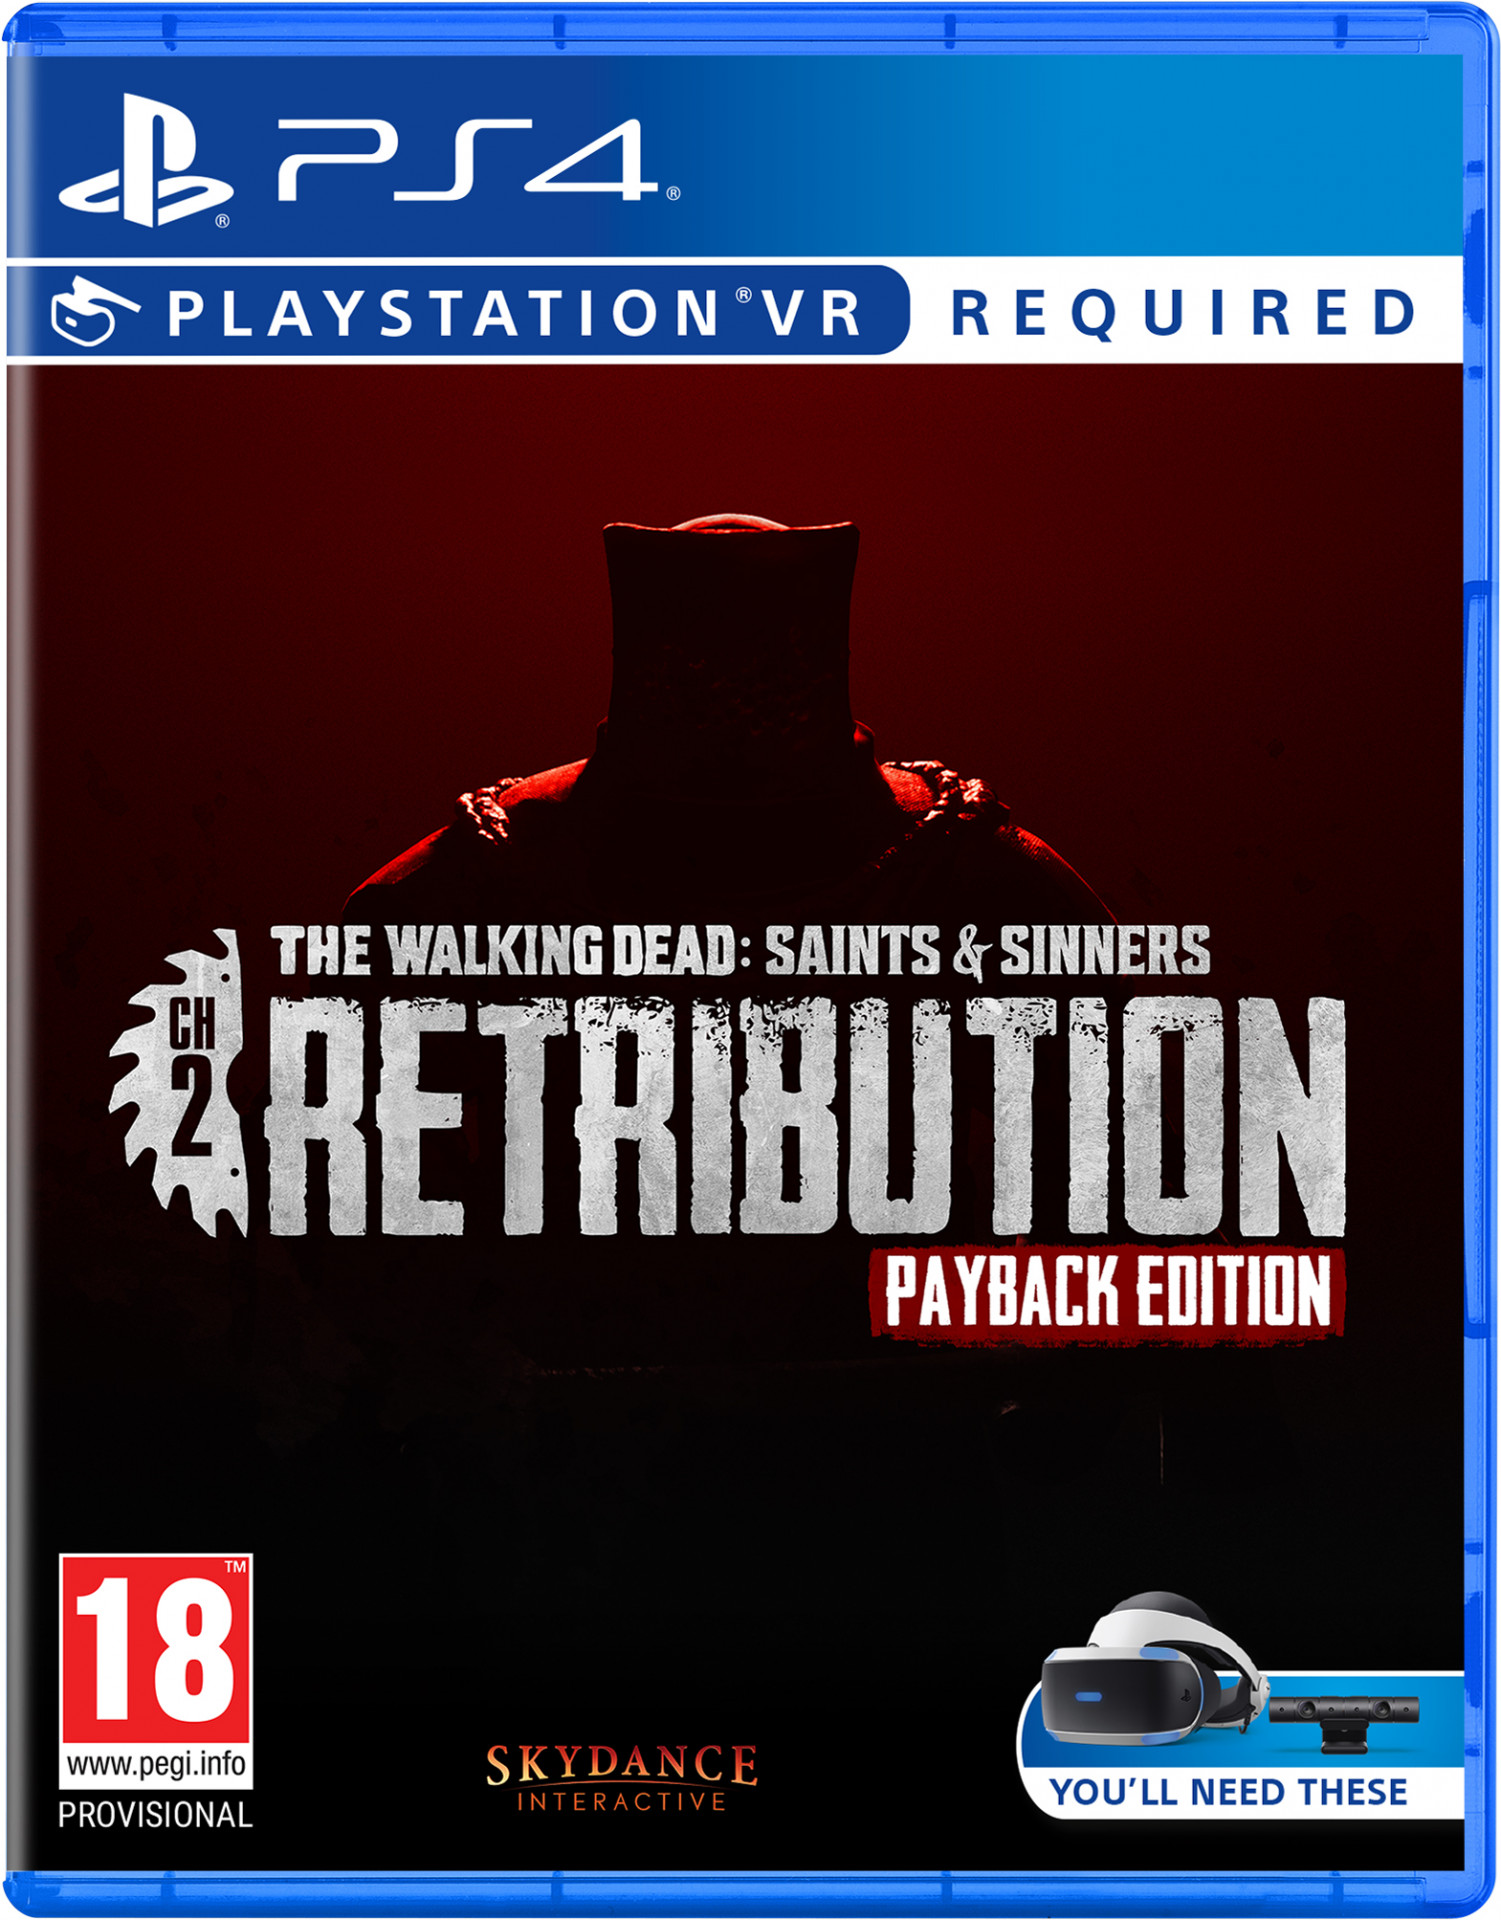 The Walking Dead: Saints & Sinners Chapter 2 Retribution - Payback Edition (PSVR) (PS4), Skydance Interactive